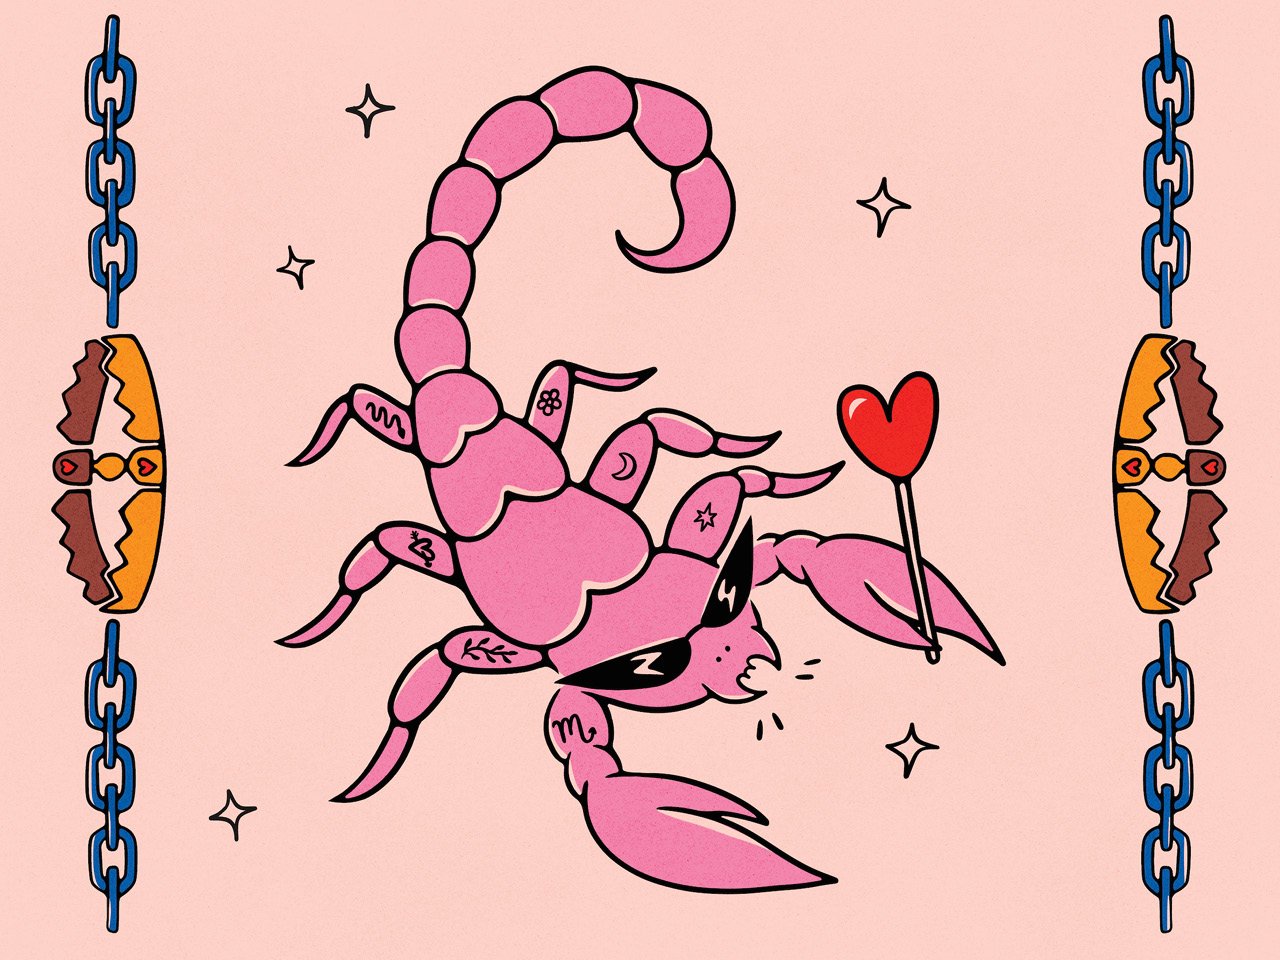 An illustration of a pink scorpion wearing sunglasses and holding a heart-shaped lollipop. The Scorpio symbol is on it's front arm like a tattoo. it's other arm and legs have symbol tattoos as well like a star, moon, flower and snake.